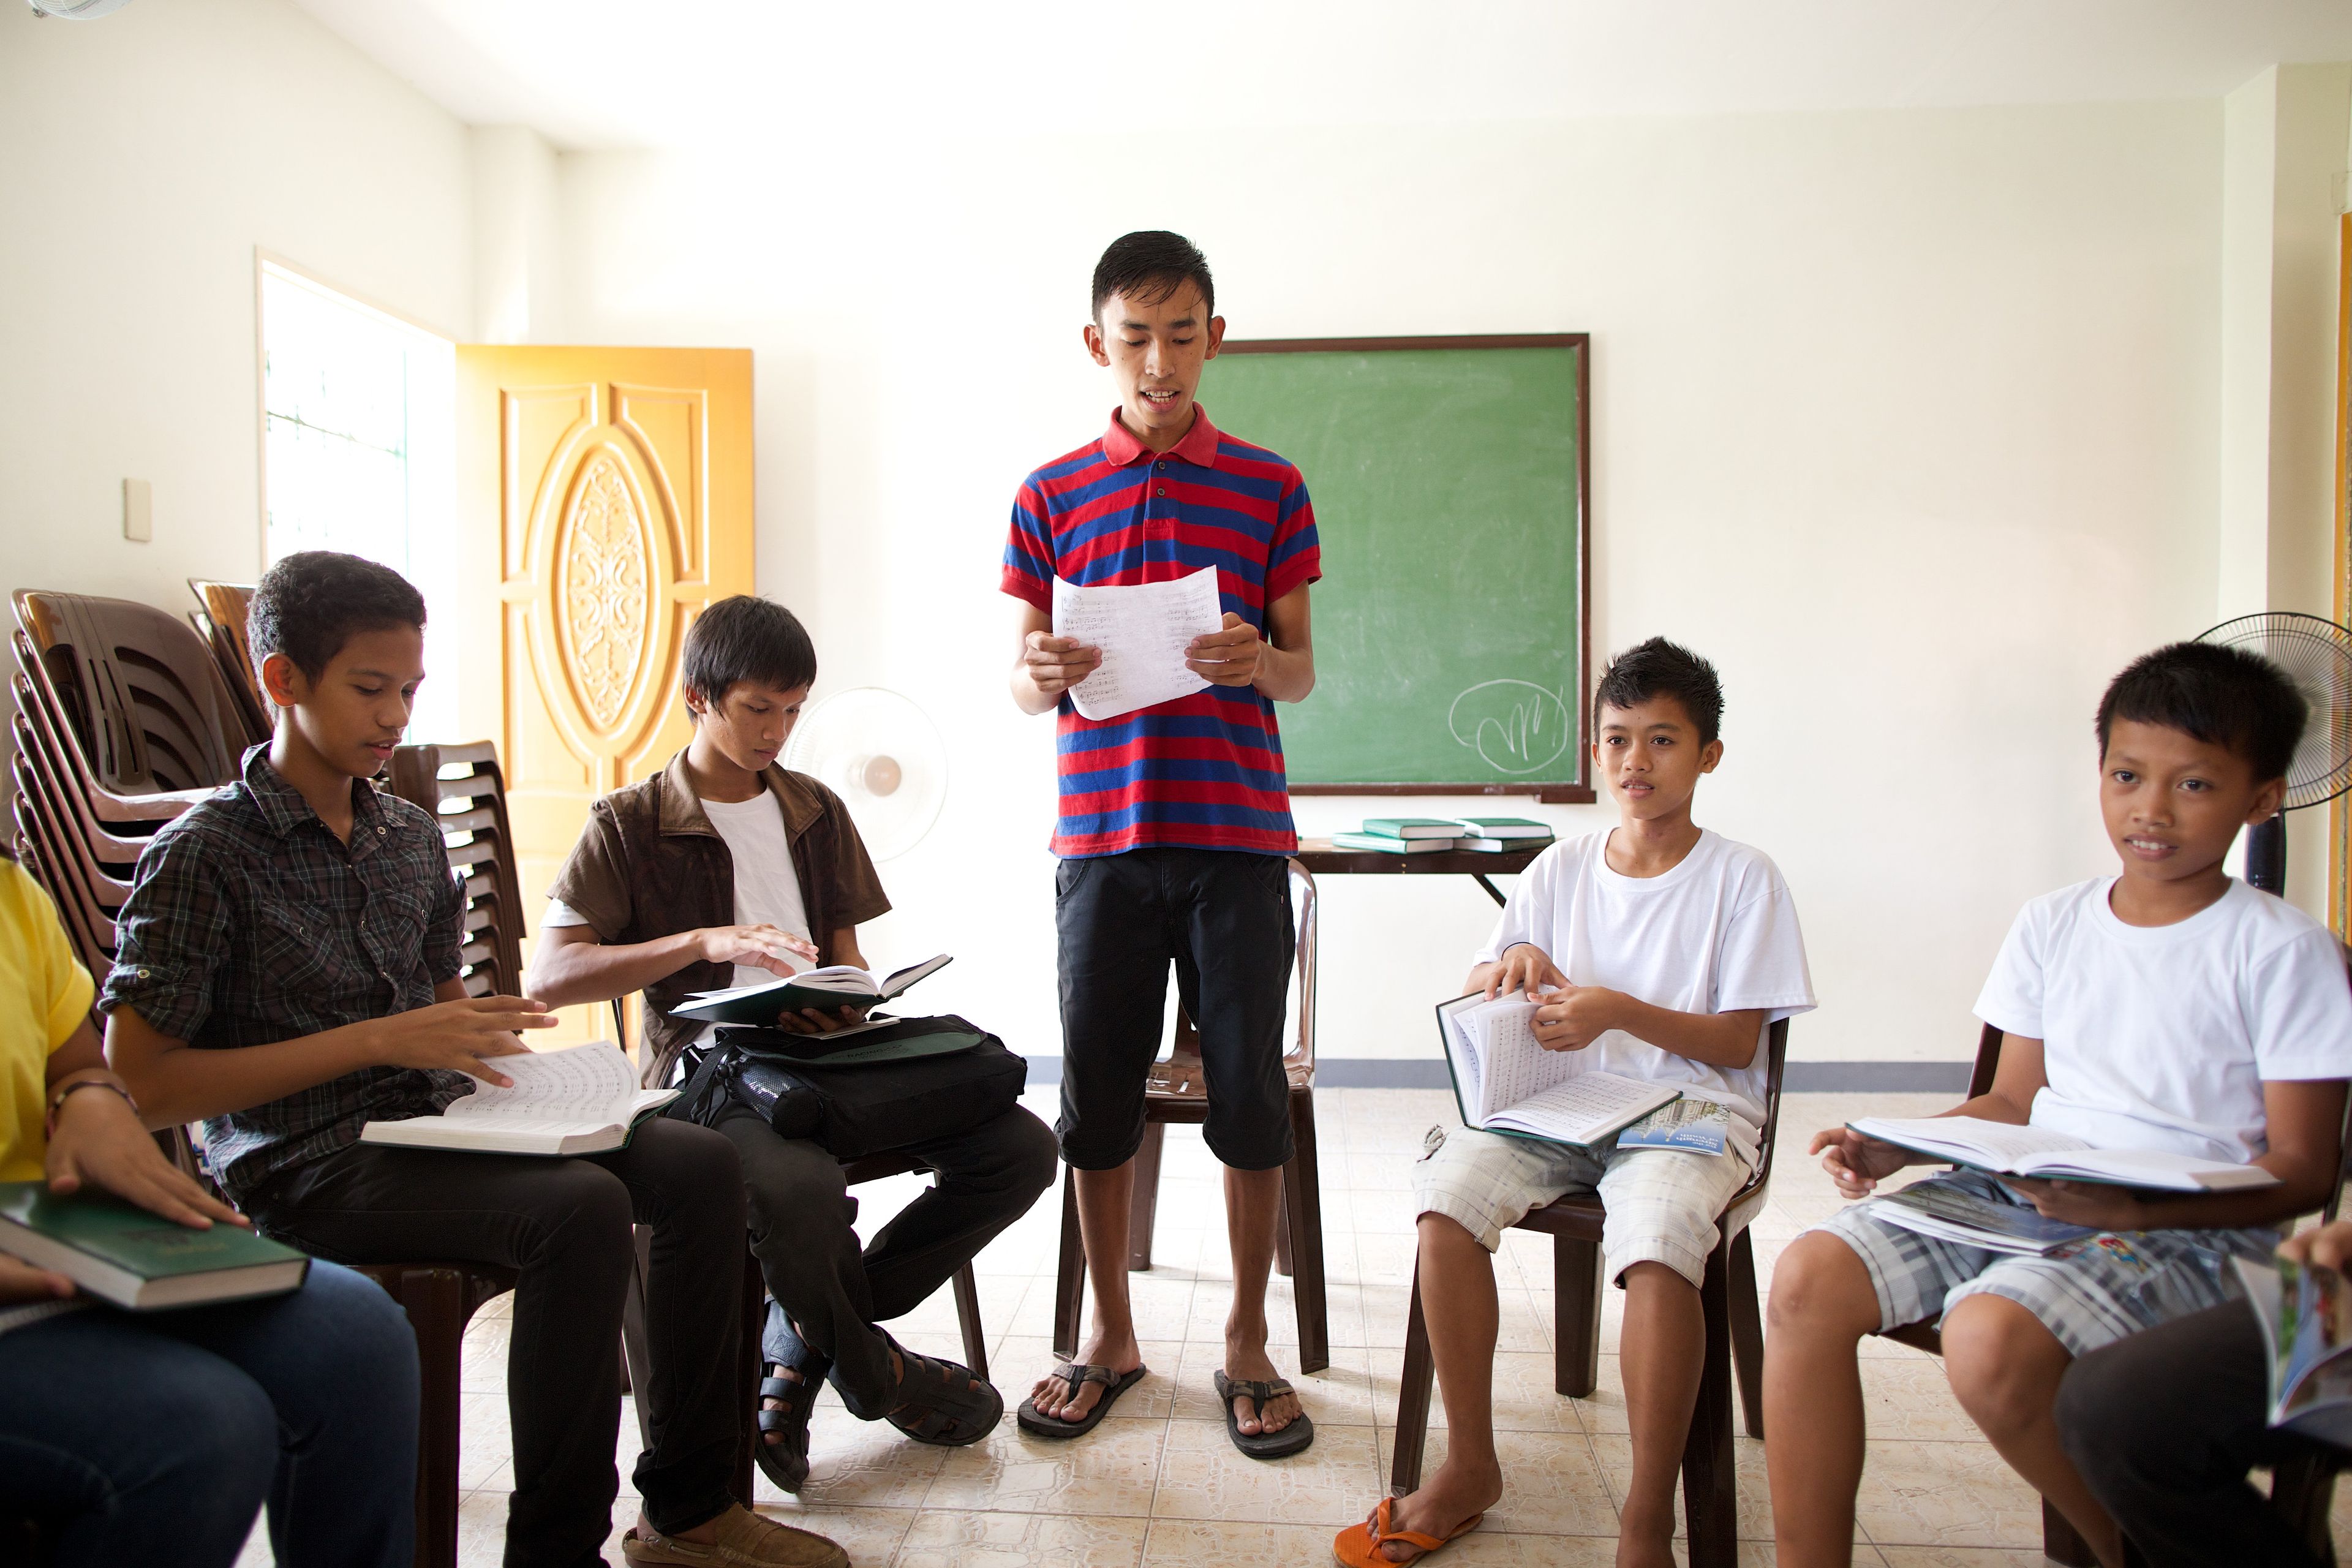 A group of young men from the Philippines sitting in a circle while one young man stands and reads to them.